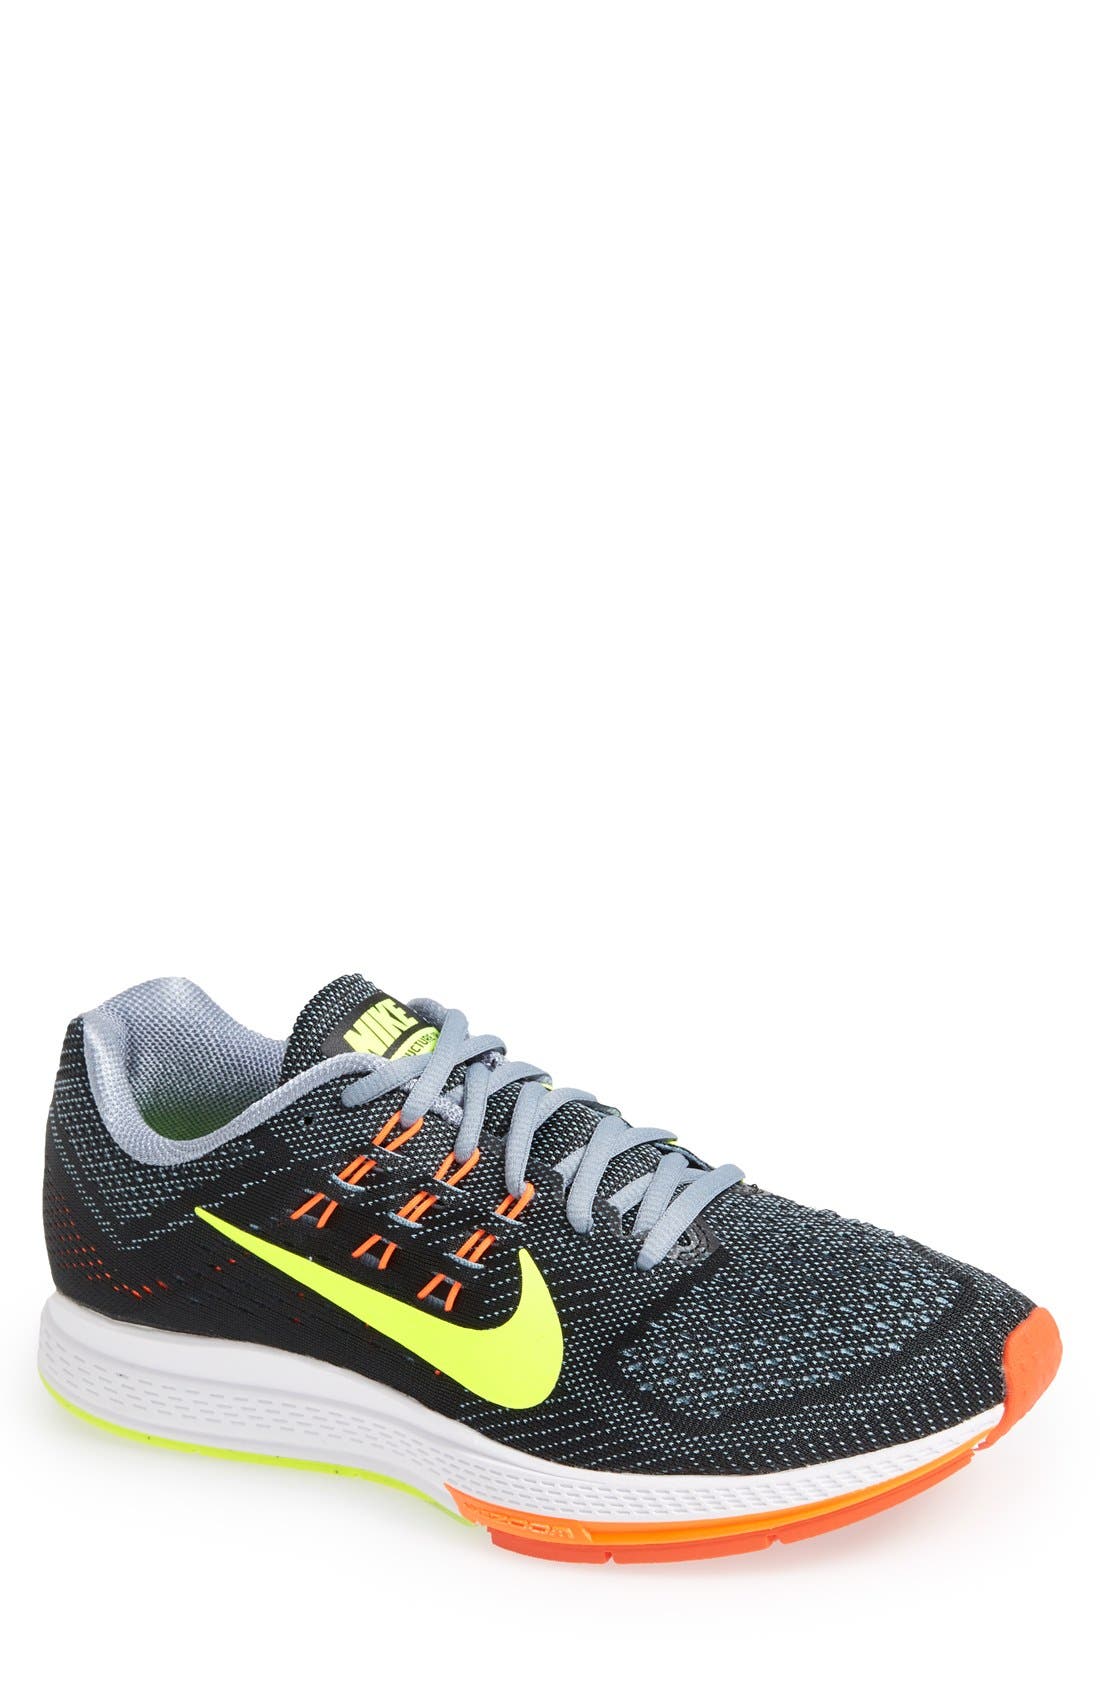 nike structure 18 mens